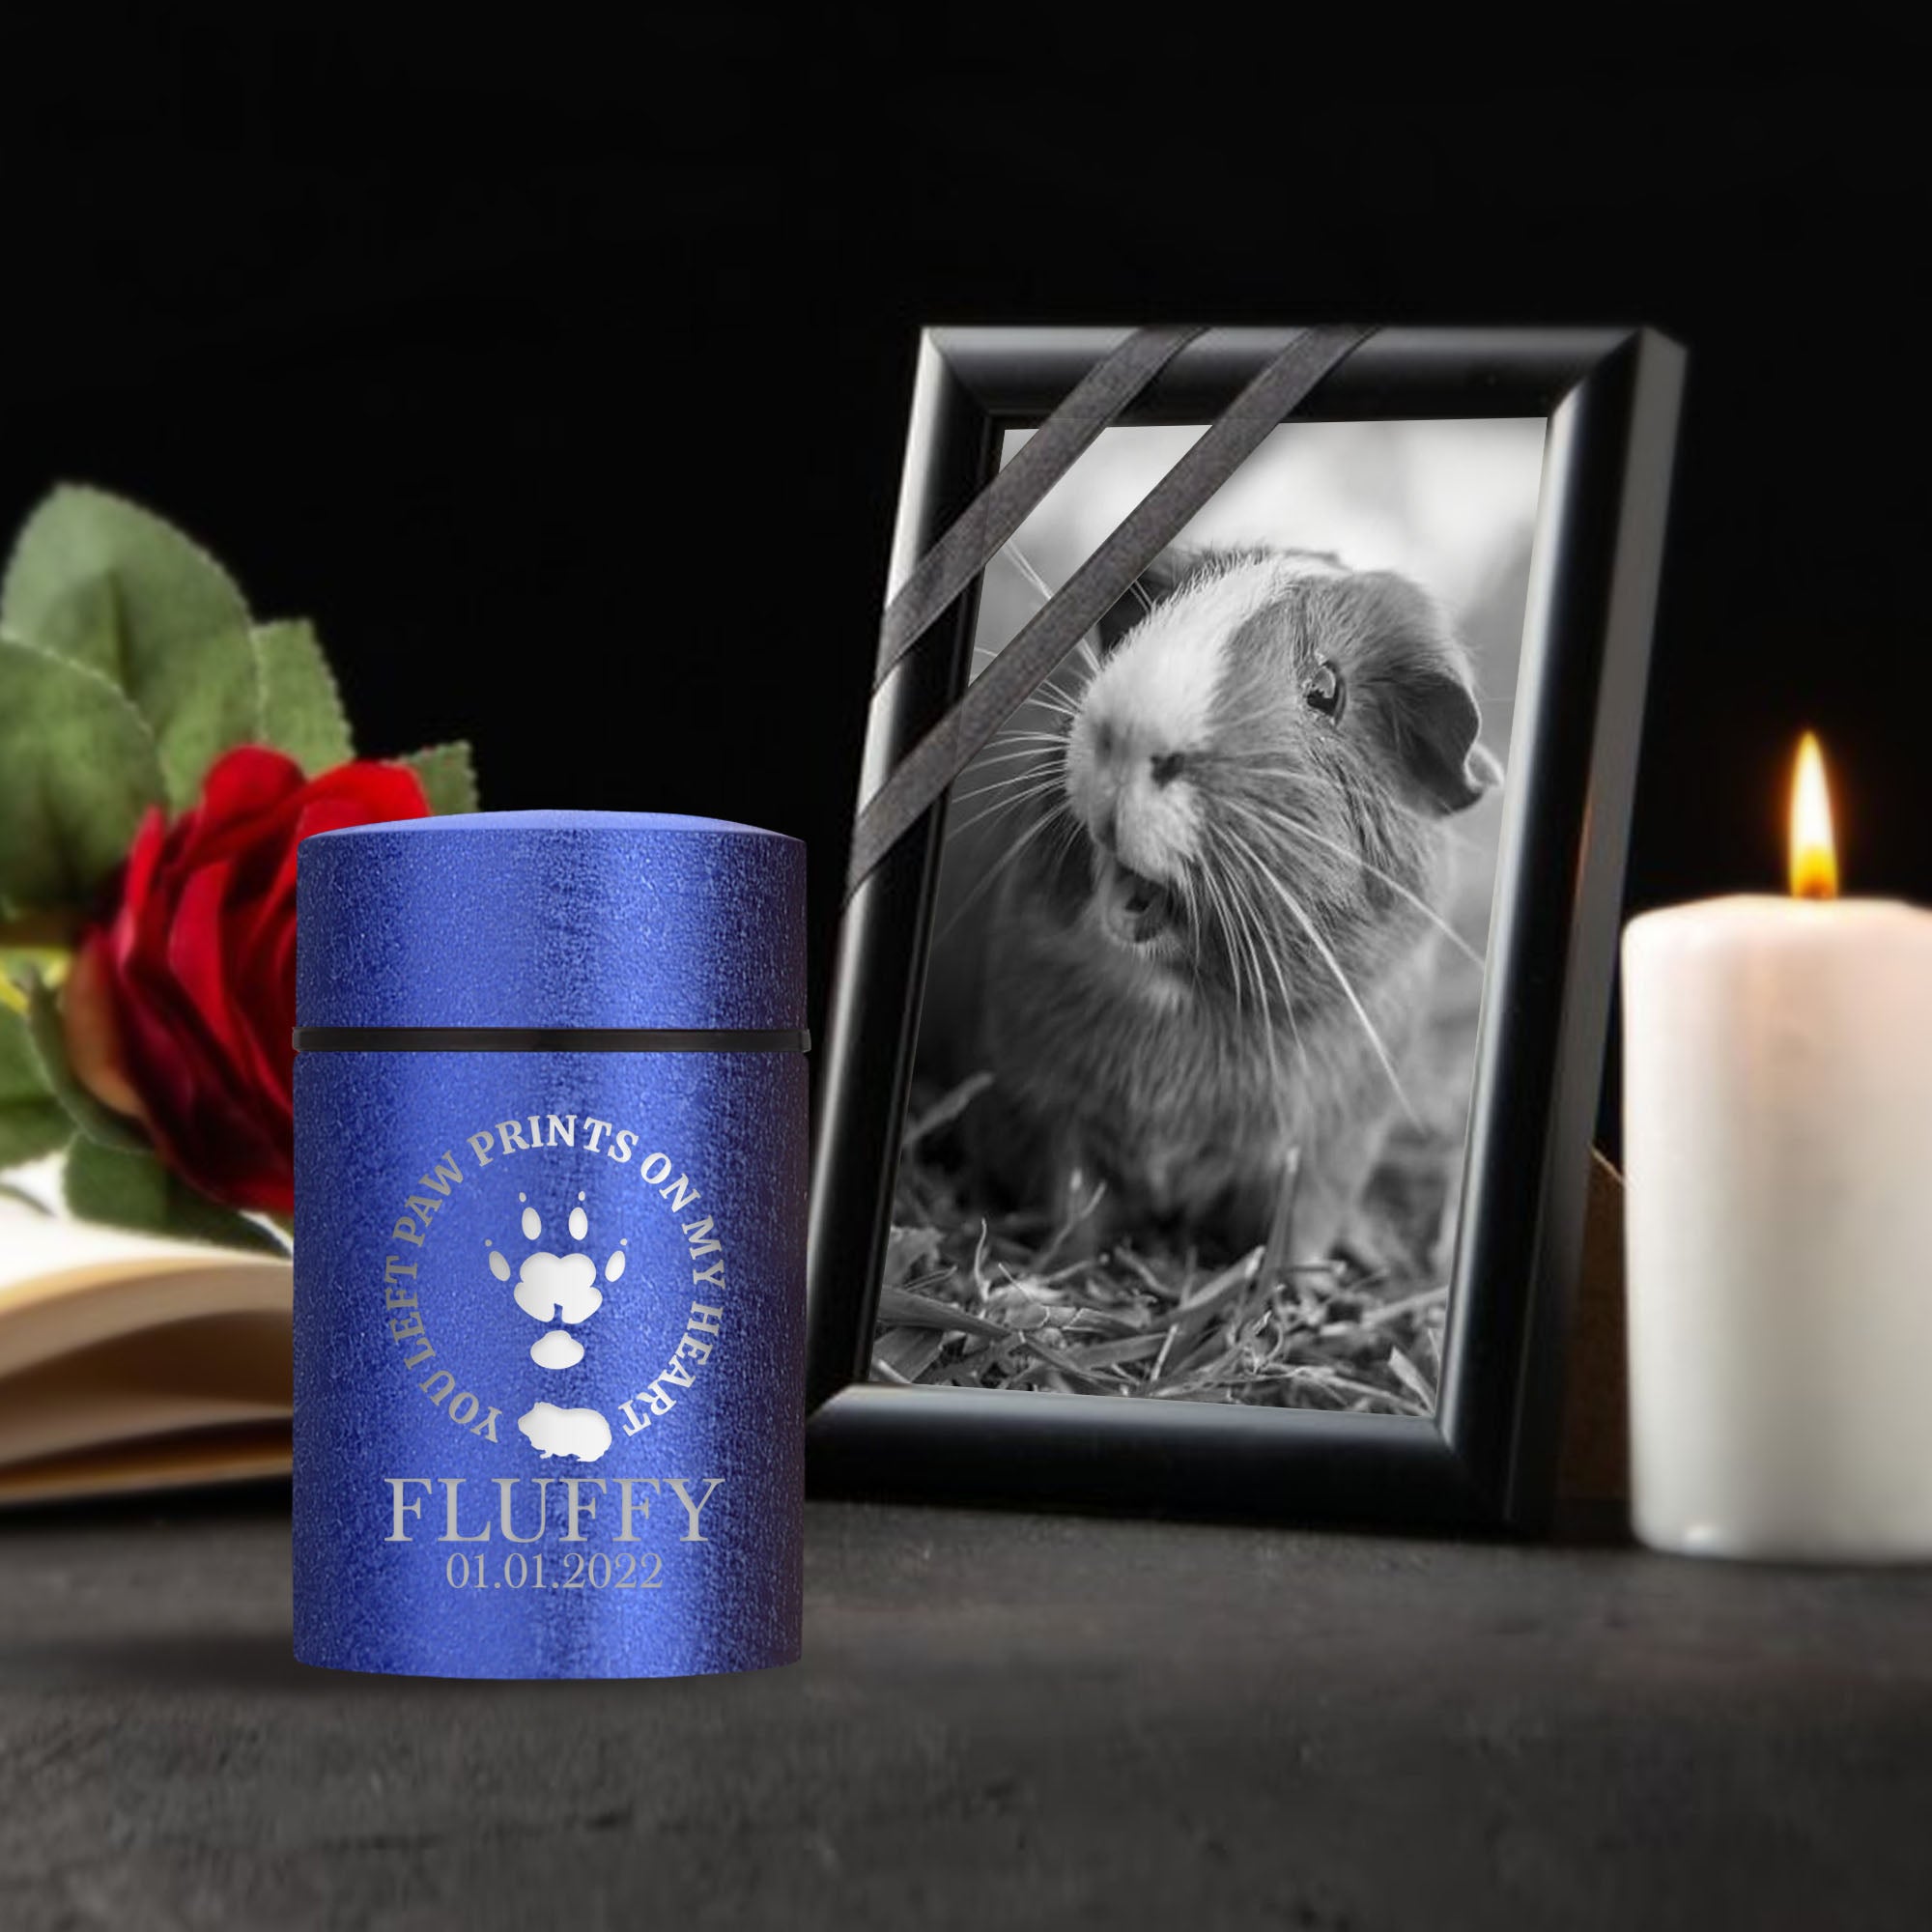 Products Personalized Custom Compact Mini Urn Keepsake Textured Pet Cremation Urn - Engraved Powder Coat Steel Urn for Guinea Pig Memorial Ashes | 3.2" x 2" (4-8 lb Capacity)